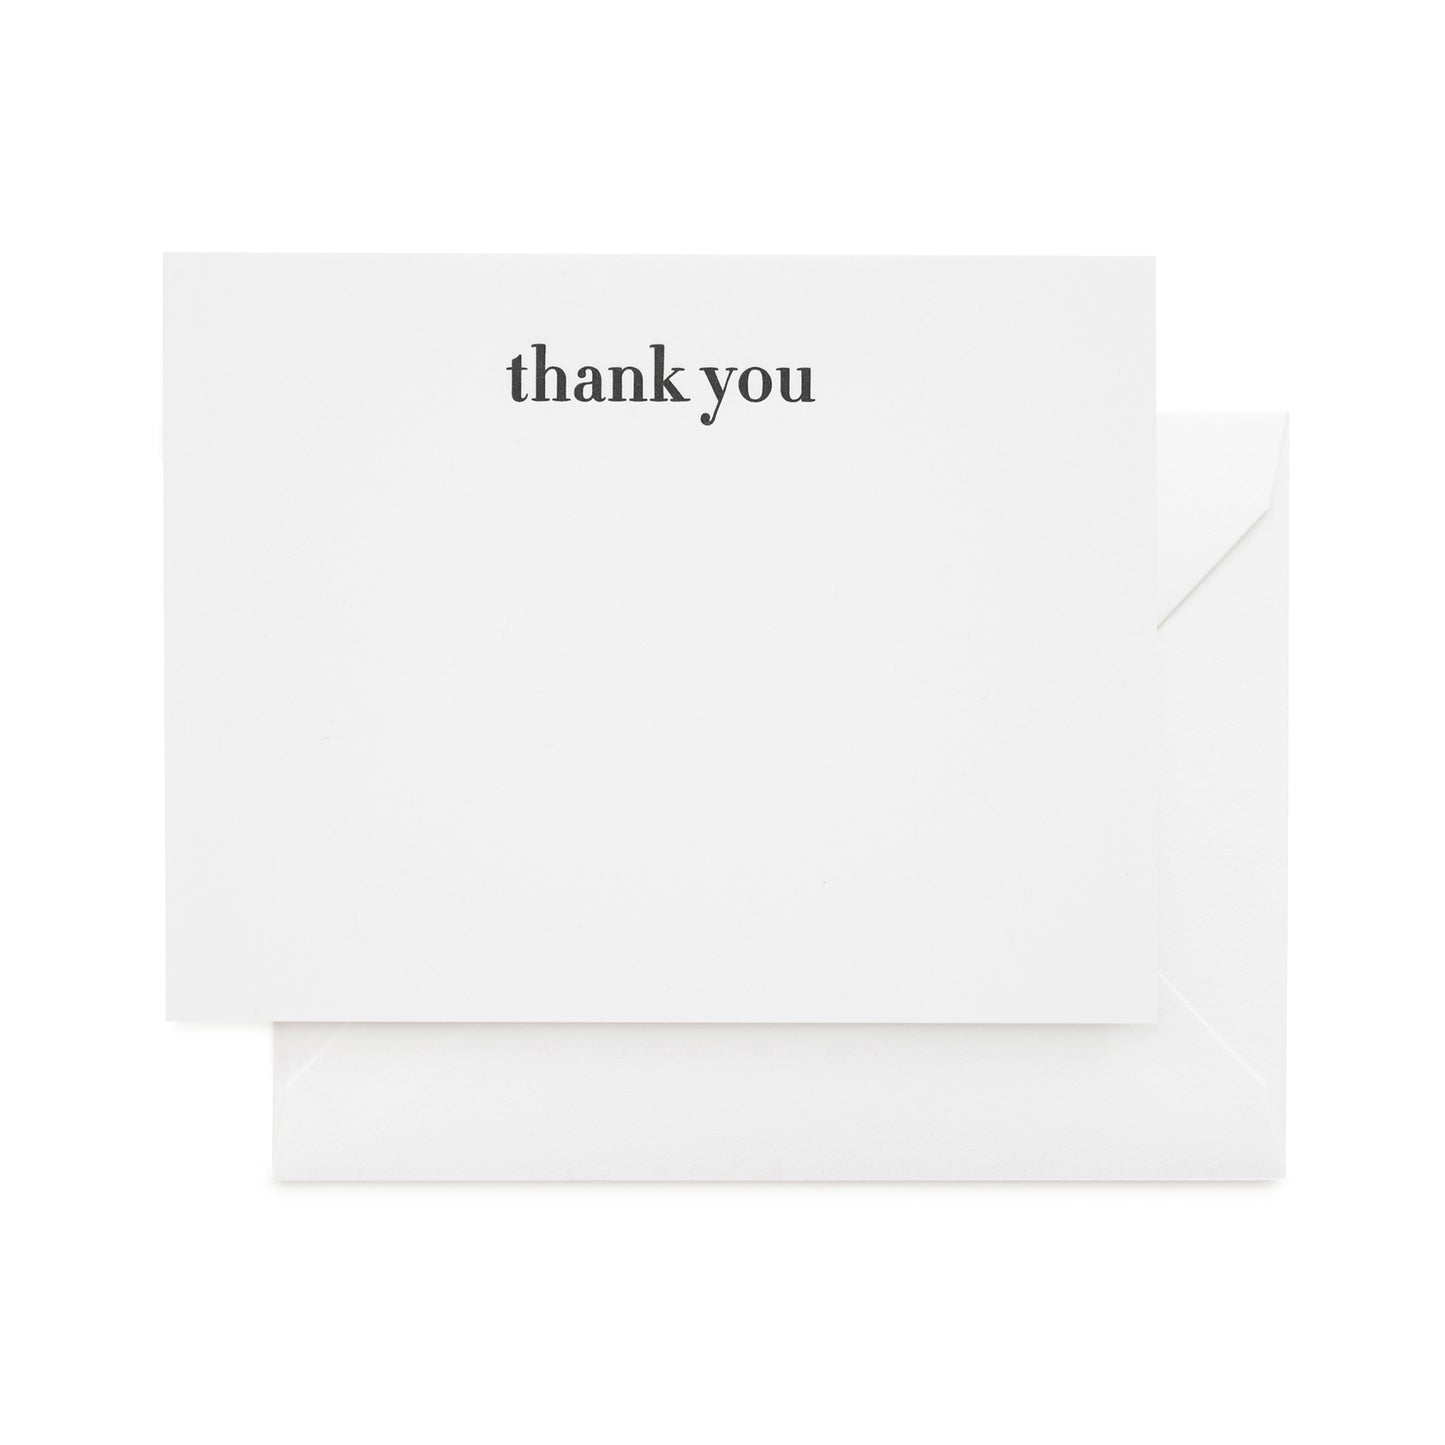 white card with black thank you text and white envelope